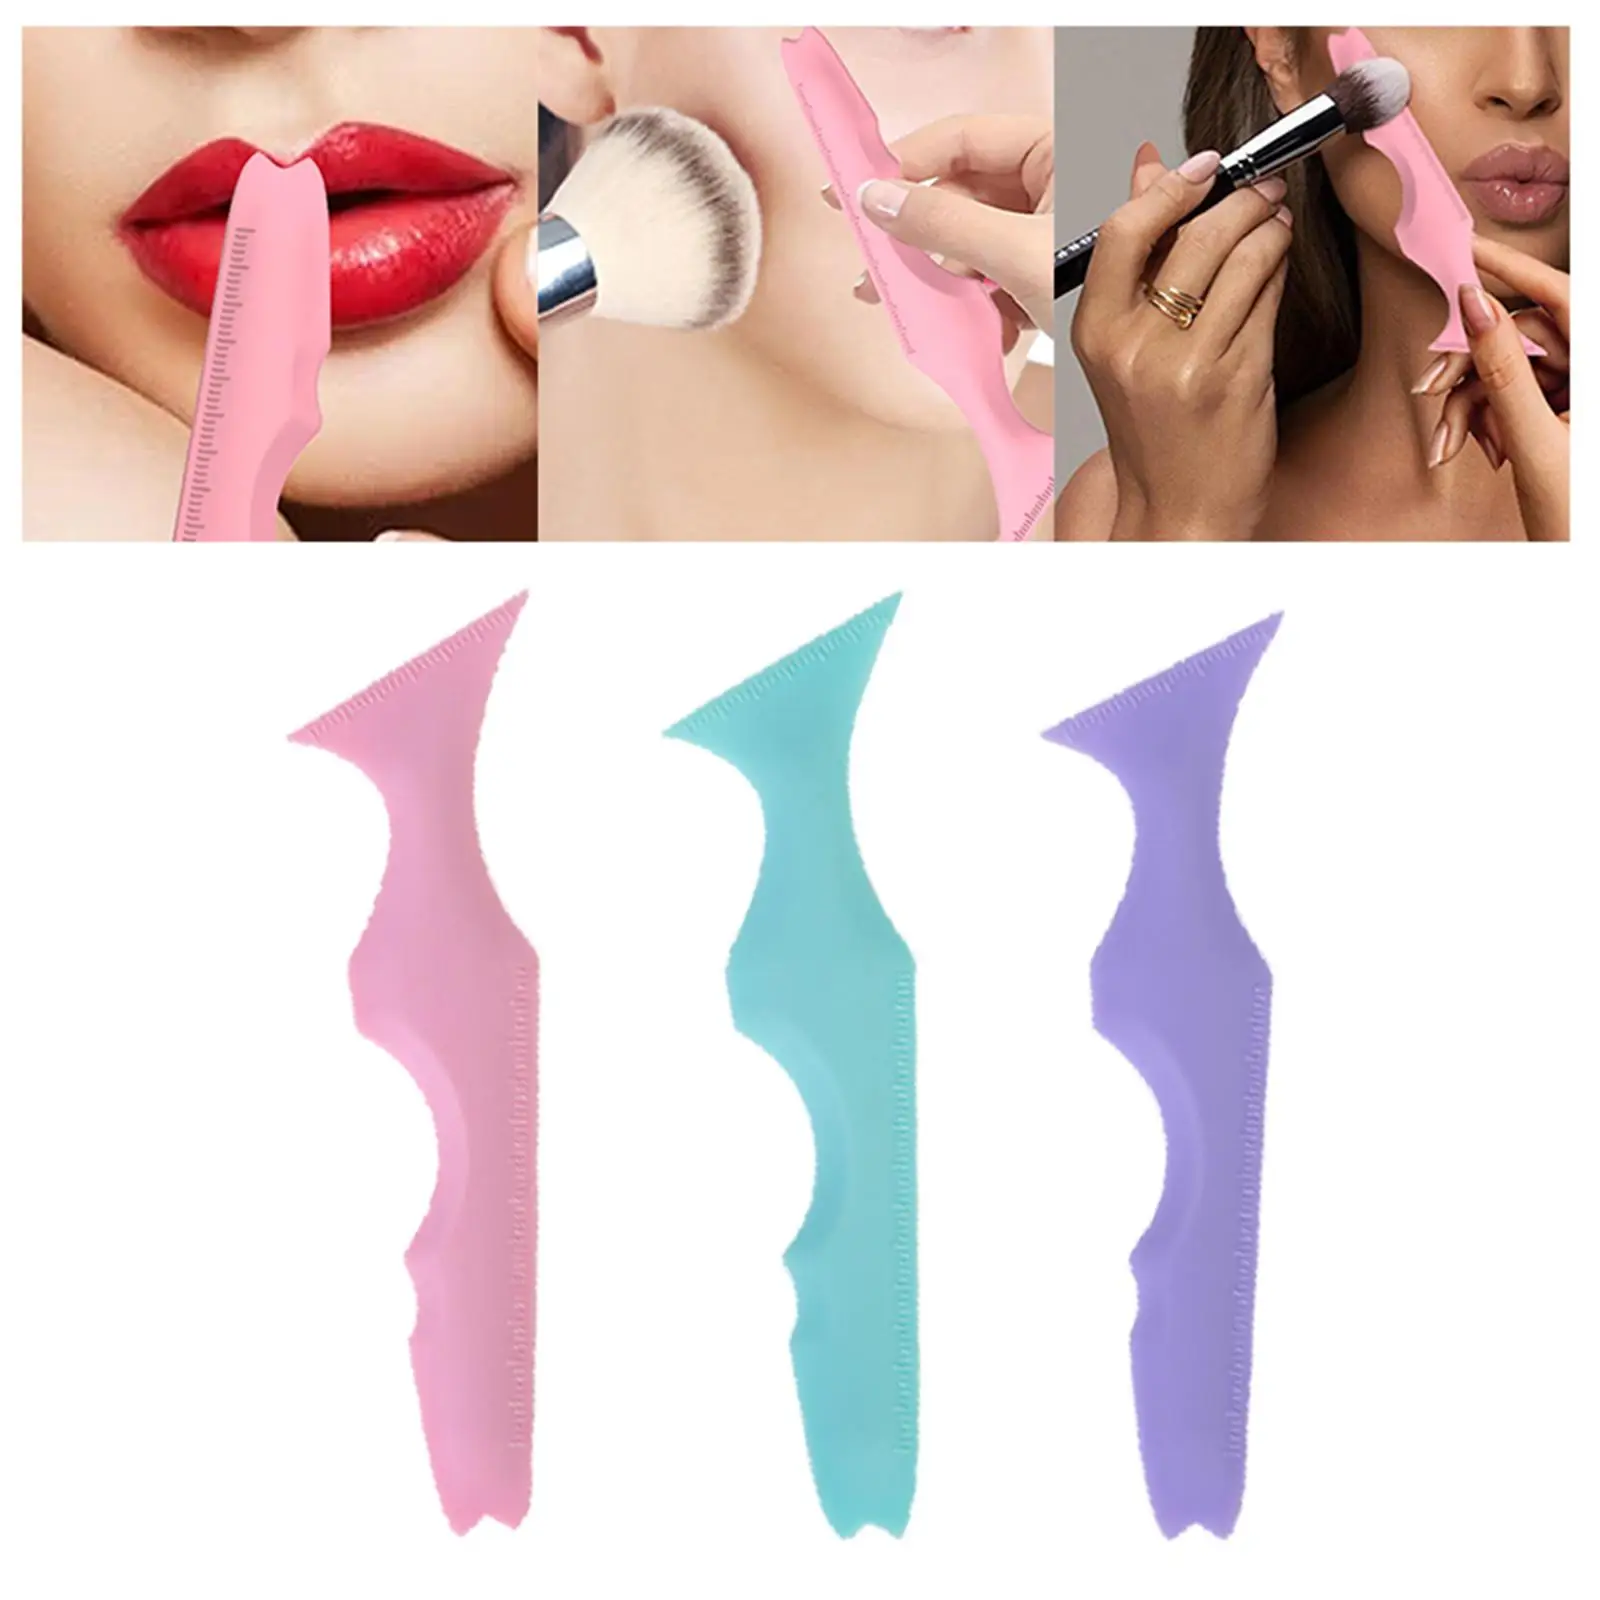 Silicone Eyeliner Stencils Easy to Use Eyeliner Shadow Guide makeup Tool Eyeliner Assistant for Beginners Lady Girls Women